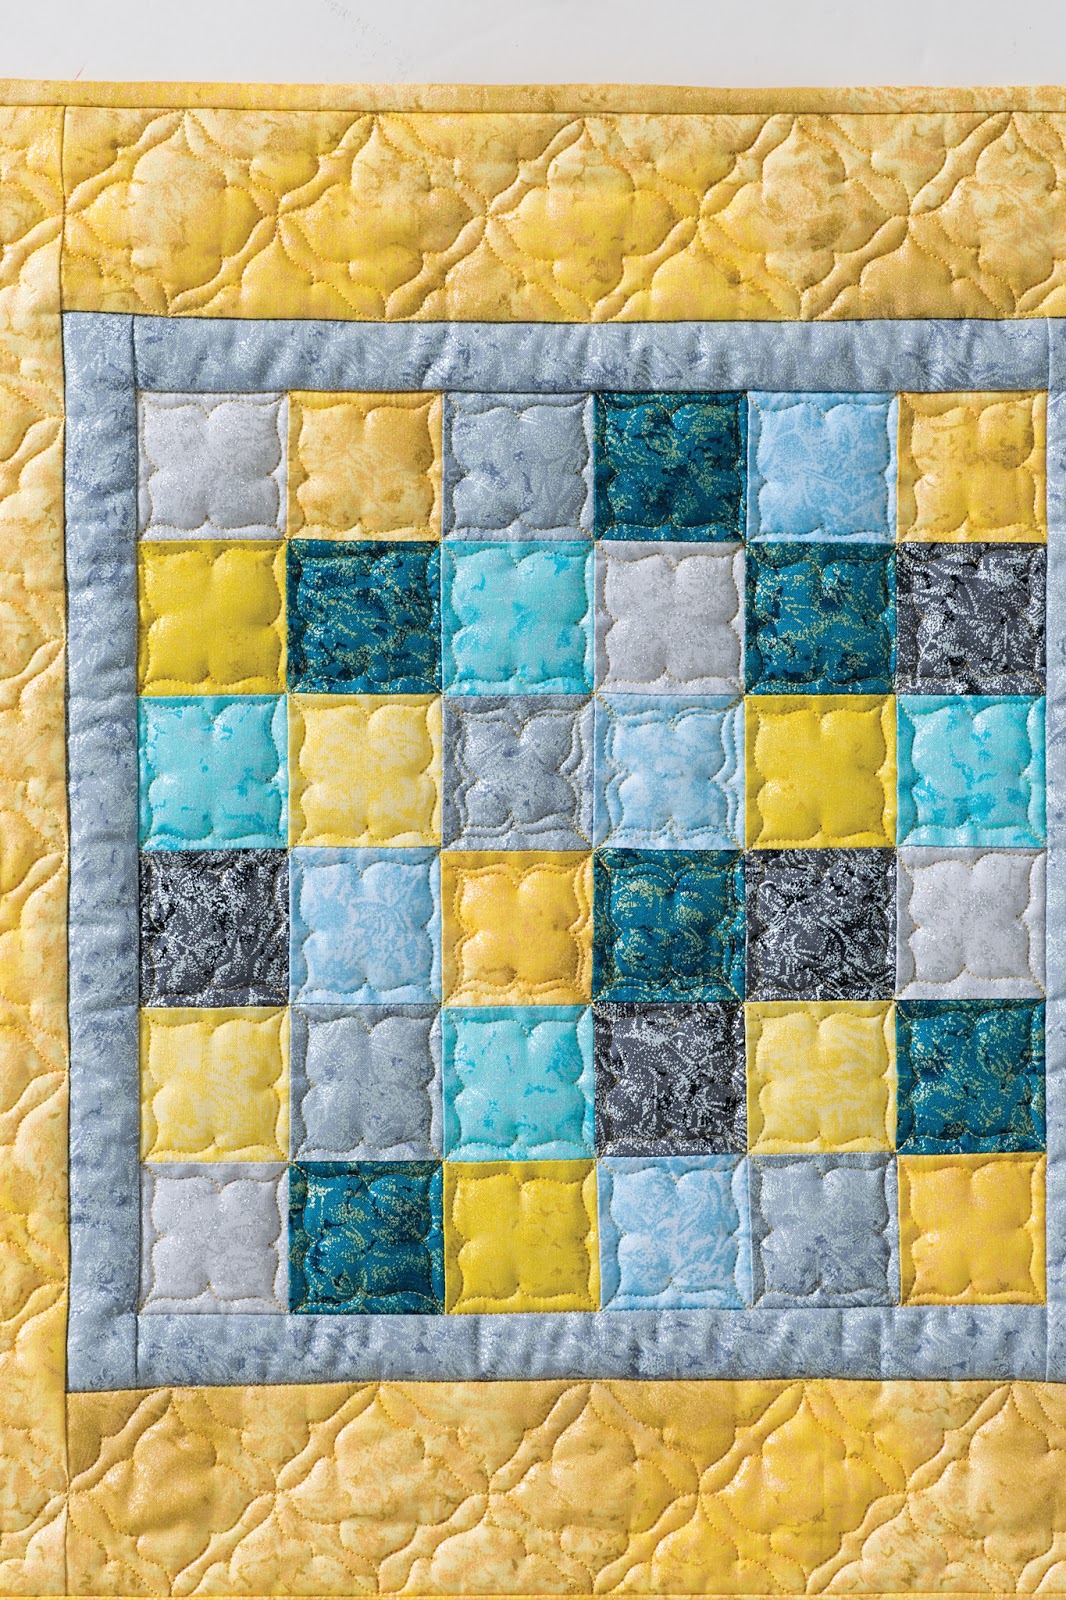 Continuous Curves For Free Motion Machine Quilting Squares And